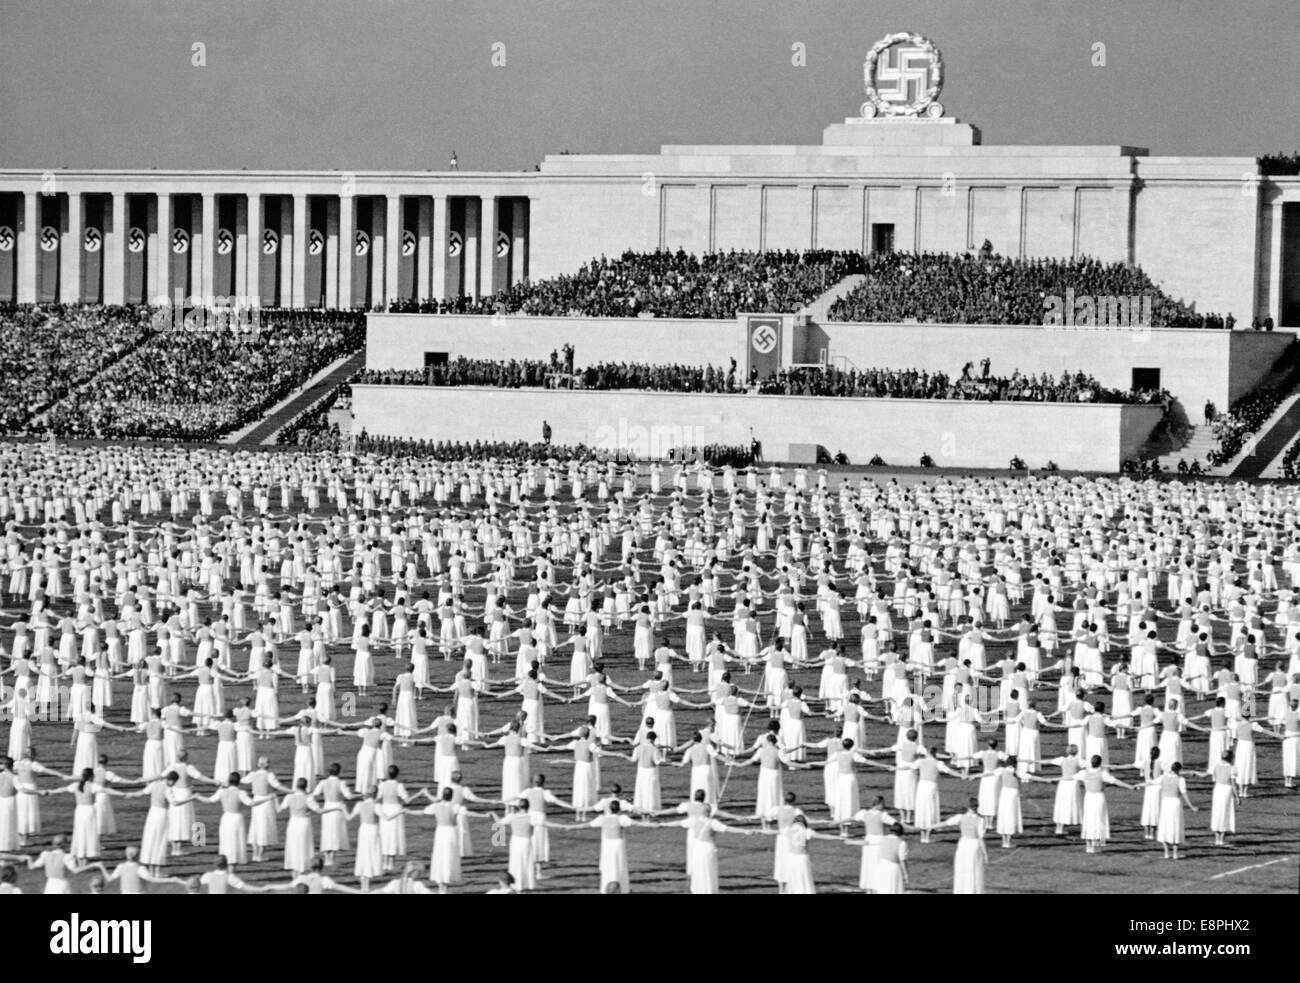 Nuremberg Rally in Nuremberg, Germany - Events on the occasion of 'Day of the Community' on Zeppelin Field, here 5,000 members of the League of German Girls (BDM) present folk dances. In the background the grandstand. (Flaws in quality due to the historic picture copy) Fotoarchiv für Zeitgeschichtee - NO WIRE SERVICE - Stock Photo